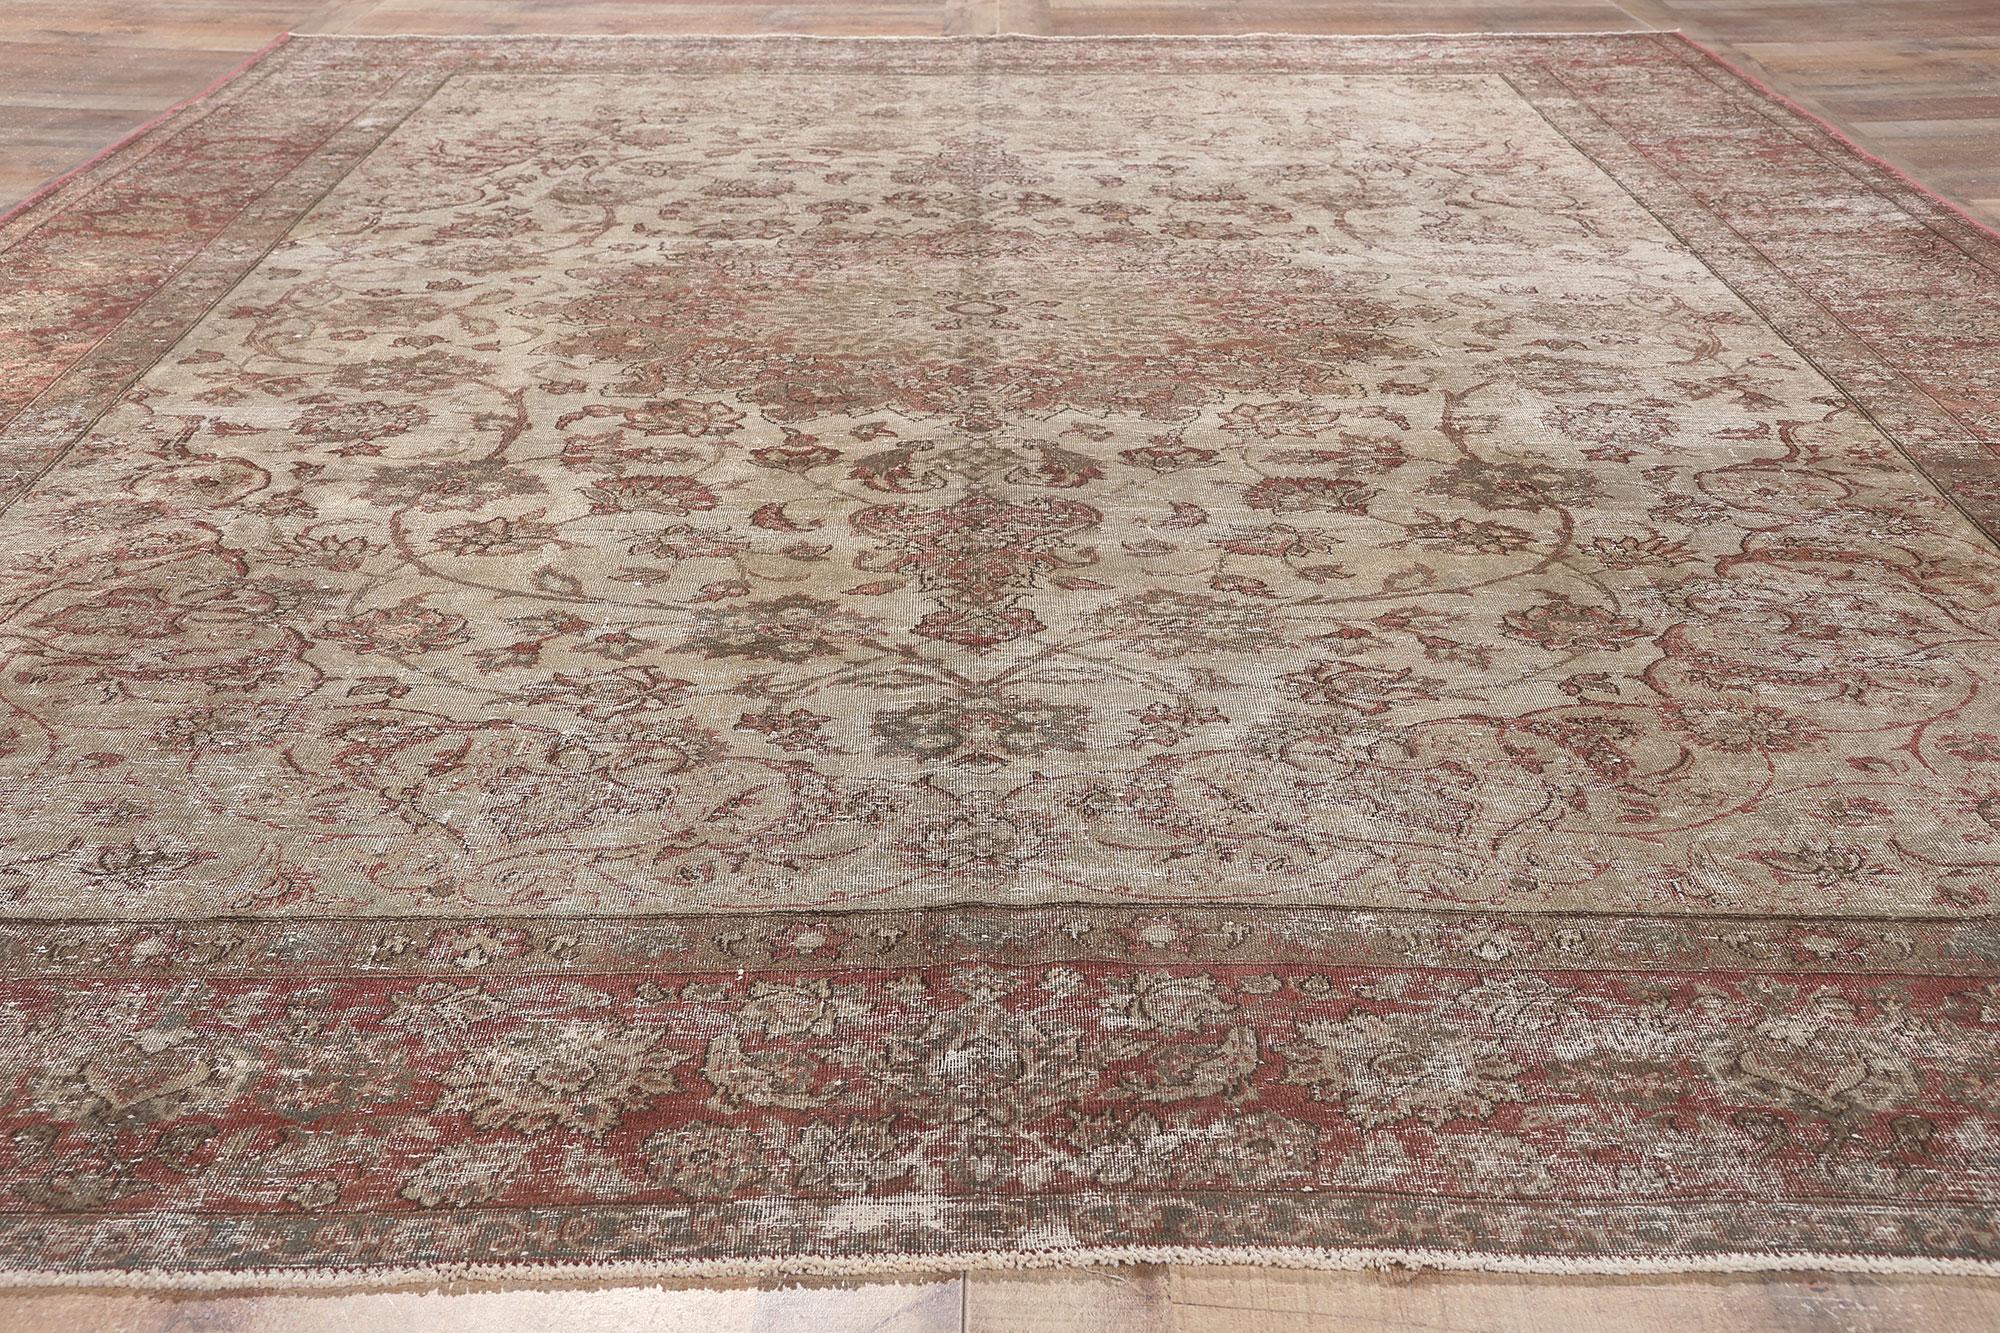 Distressed Vintage Persian Tabriz Rug with Faded Earth-Tone Colors For Sale 2